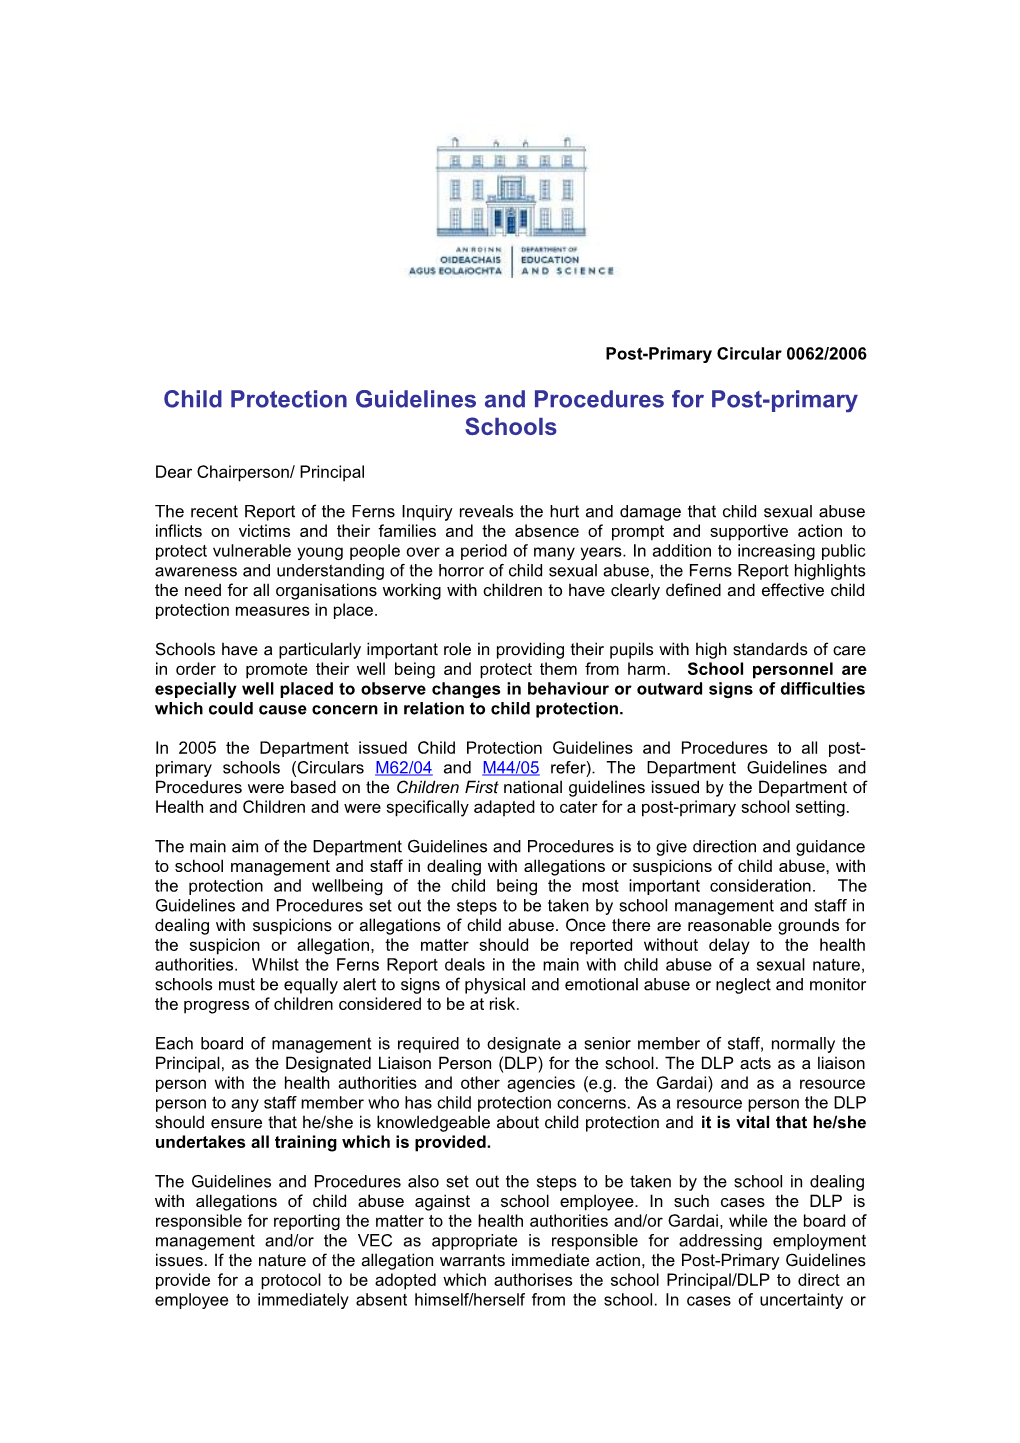 Circular 0062/2006 - Child Protection Guidelines and Procedures for Post-Primary Schools